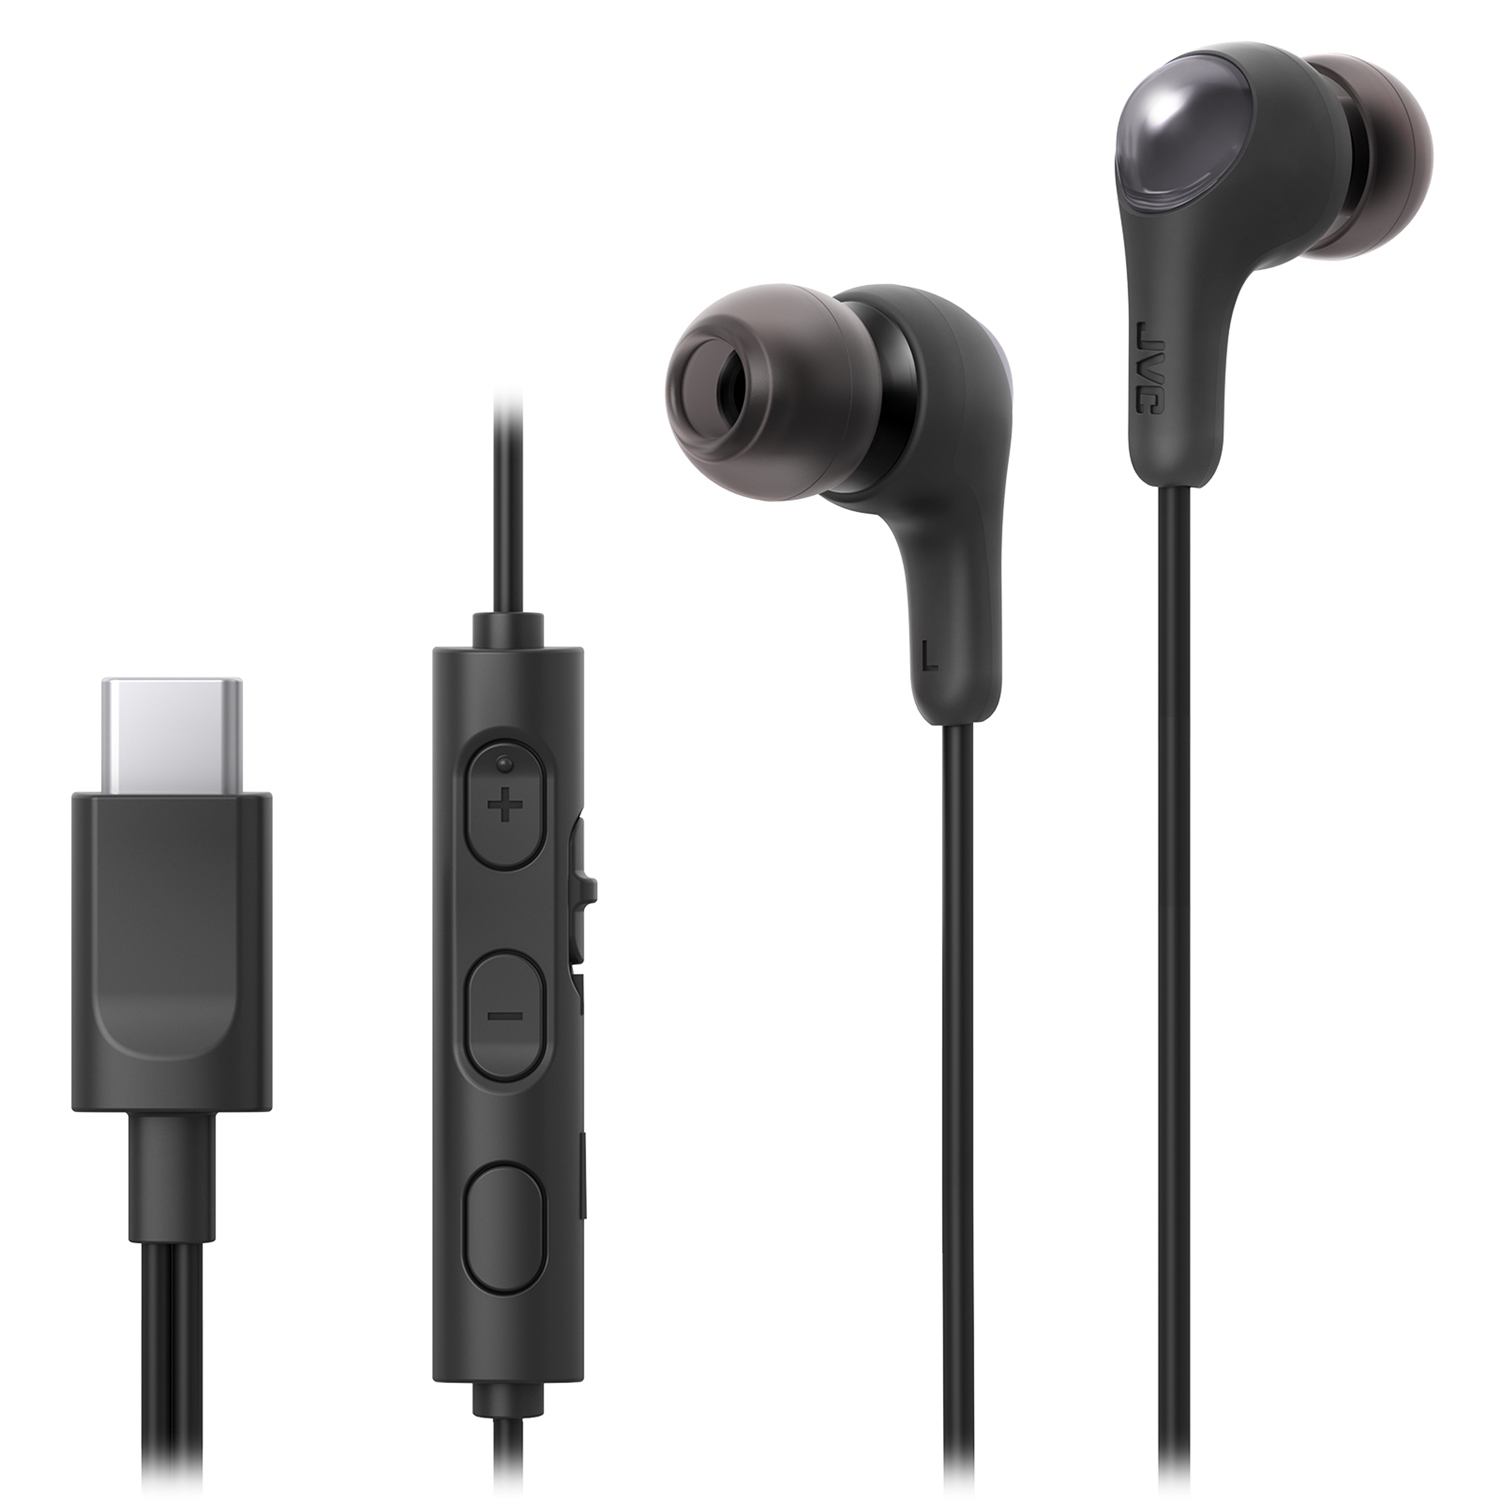 JVC HA-FR9UC-B - Gumy Connect Wired USB Type-C In-Ear Headphones With Built-in Remote Control and Microphone, Black